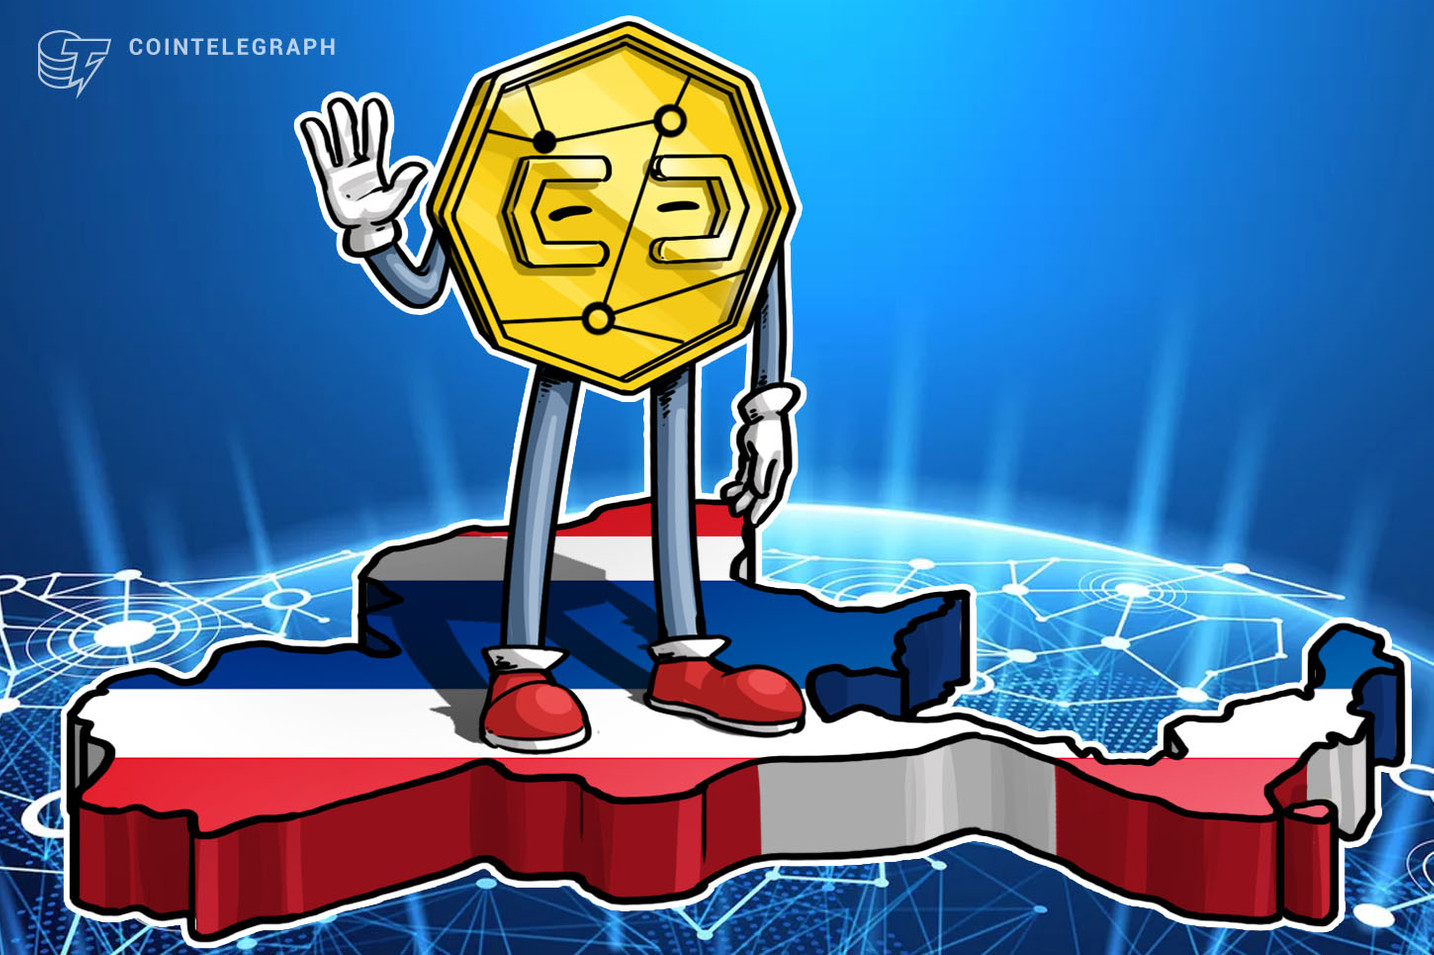 Thai finance minister critical of the current crypto speculative surge.